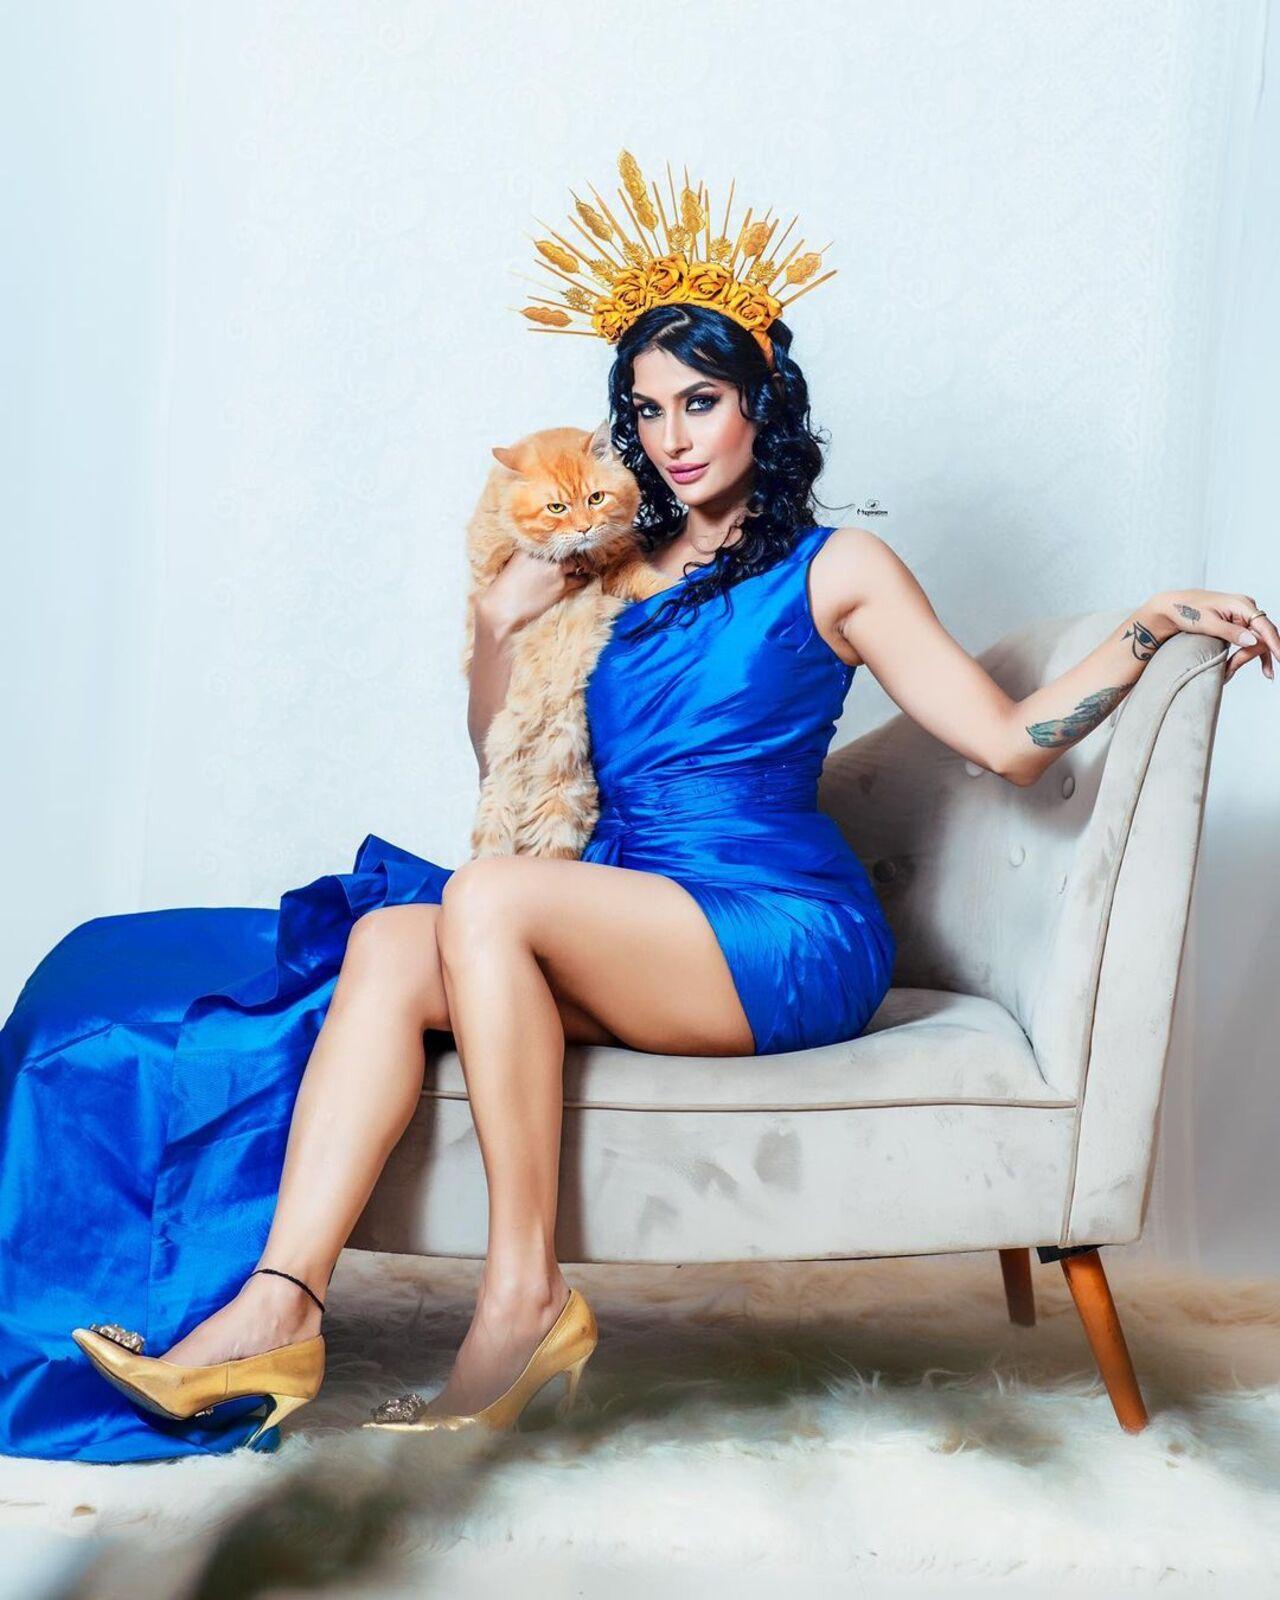 Pavitra Punia accessorised her blue dress with an intricate crown. The actress posed with a cat which elevated her fiery look